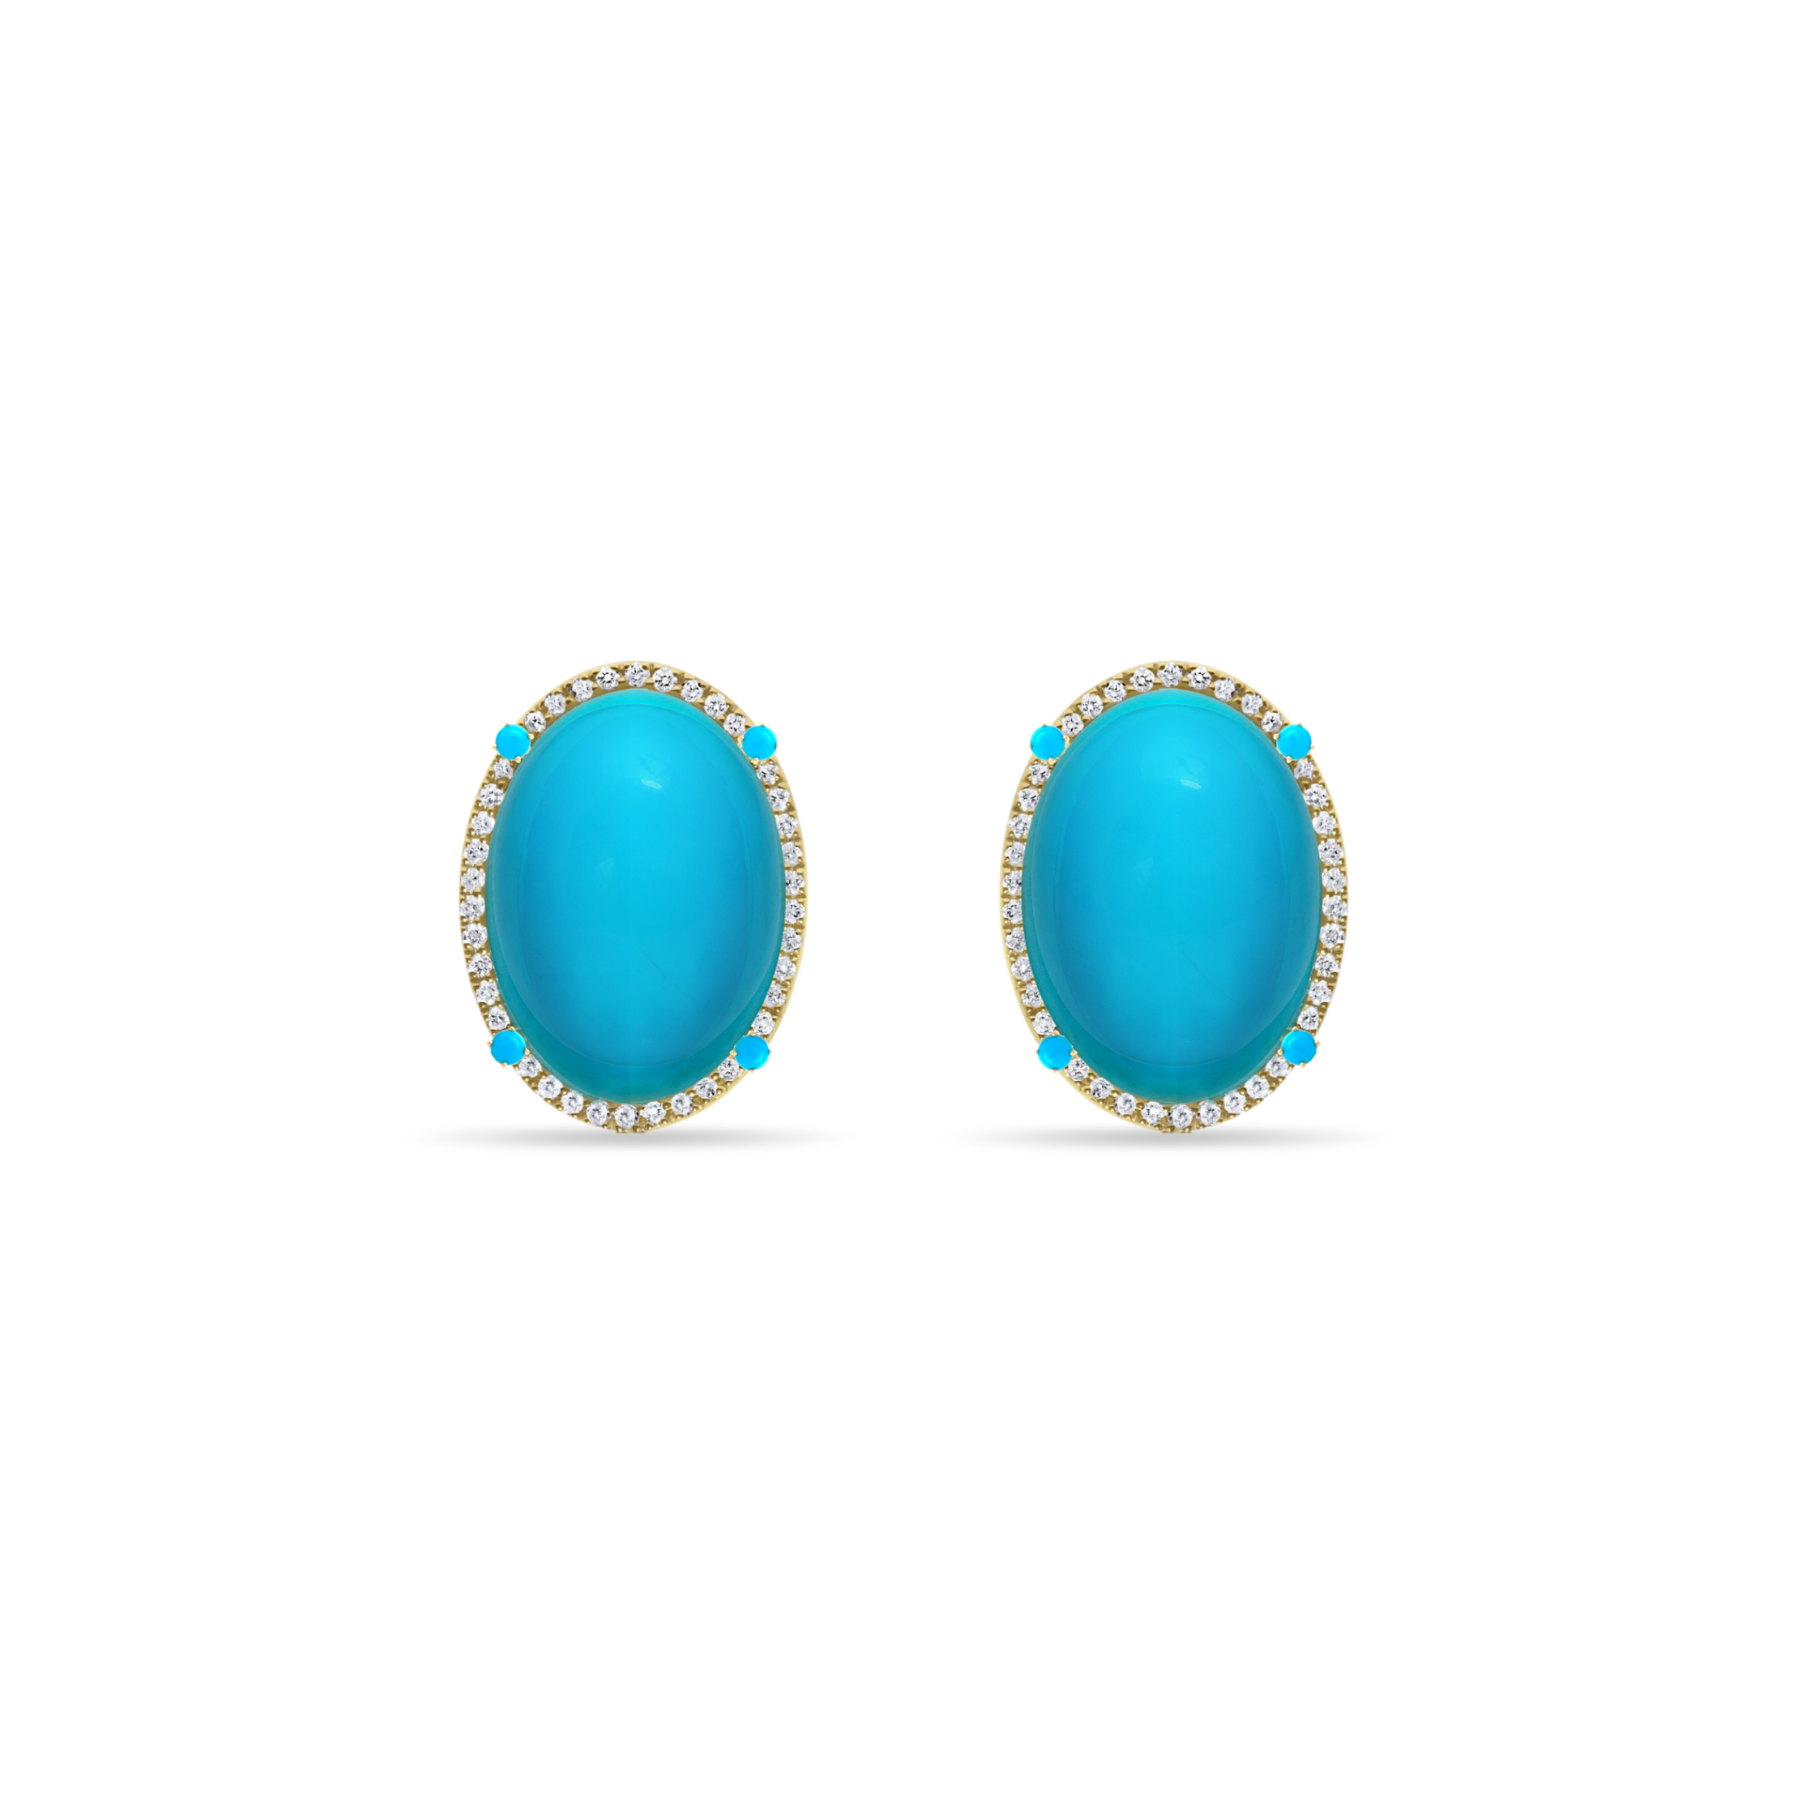 Forever Classic Turquoise & Diamonds 18ct Gold Oval Stud Earrings